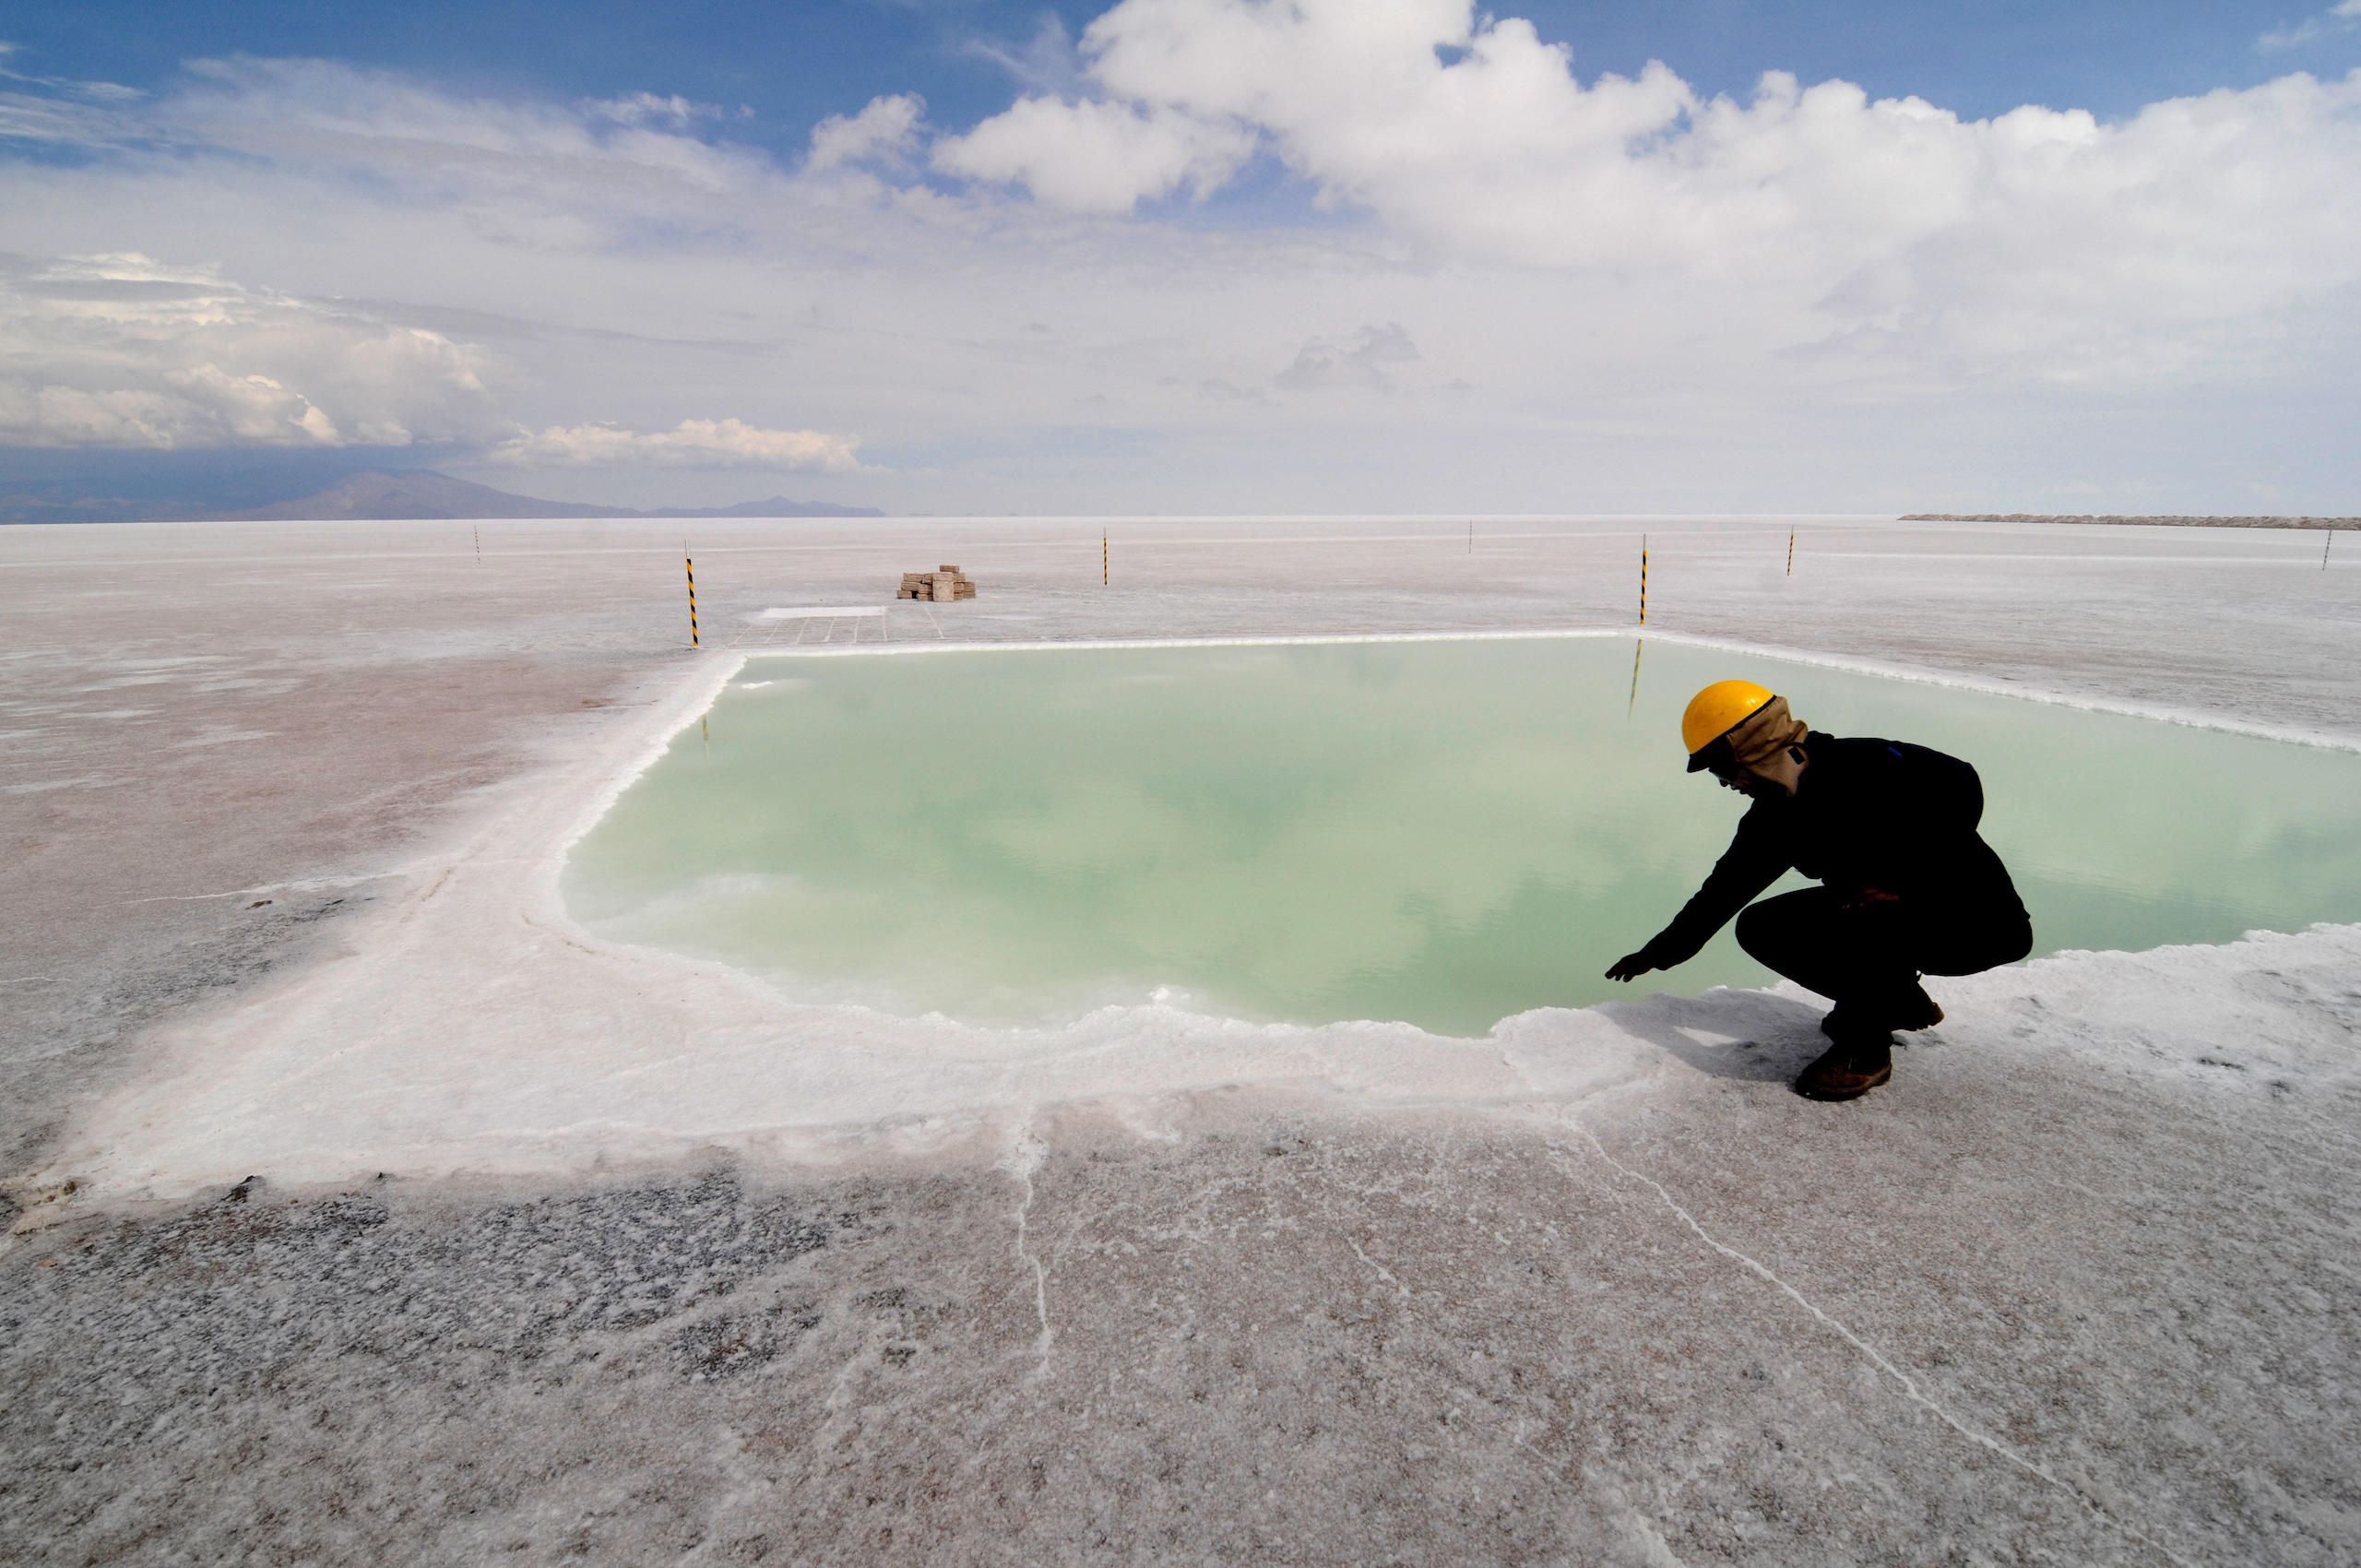 Lithium: White gold and its green challenges